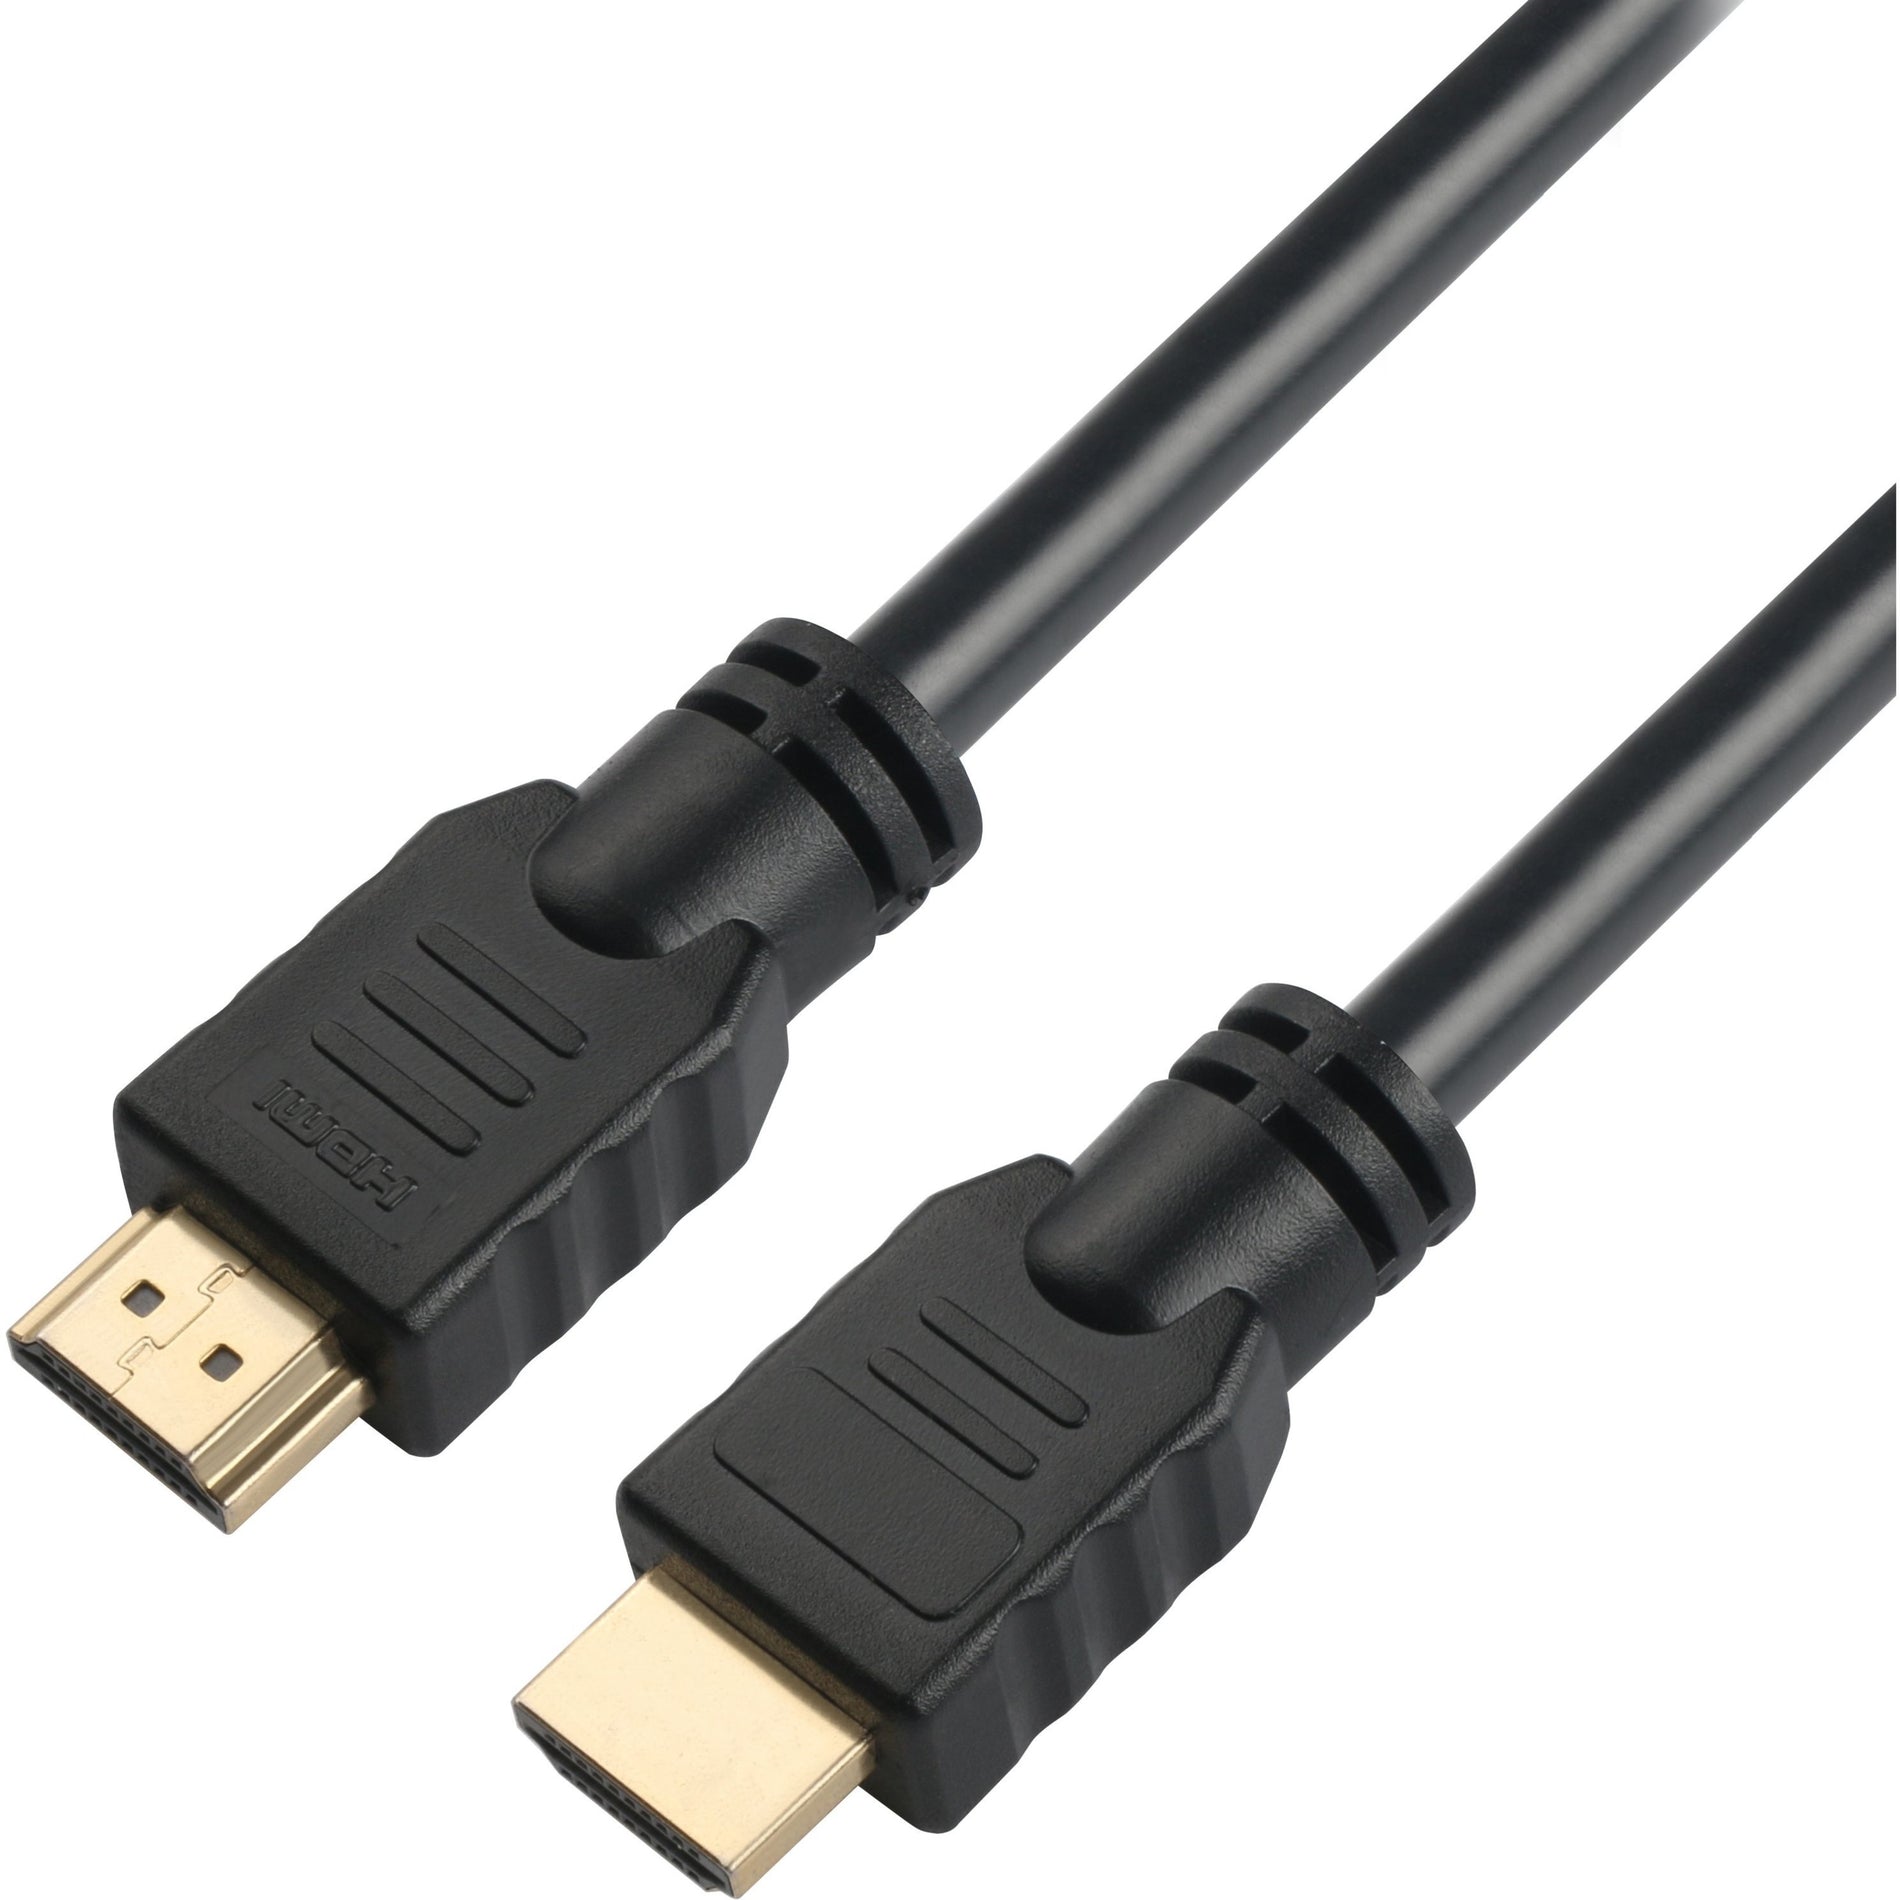 4XEM 4XHDMI4K2KPRO65 65ft 20m Ultra High Speed 4K2K HDMI Cable, Strain Relief, Gold-plated Connectors, 18 Gbit/s Data Transfer Rate